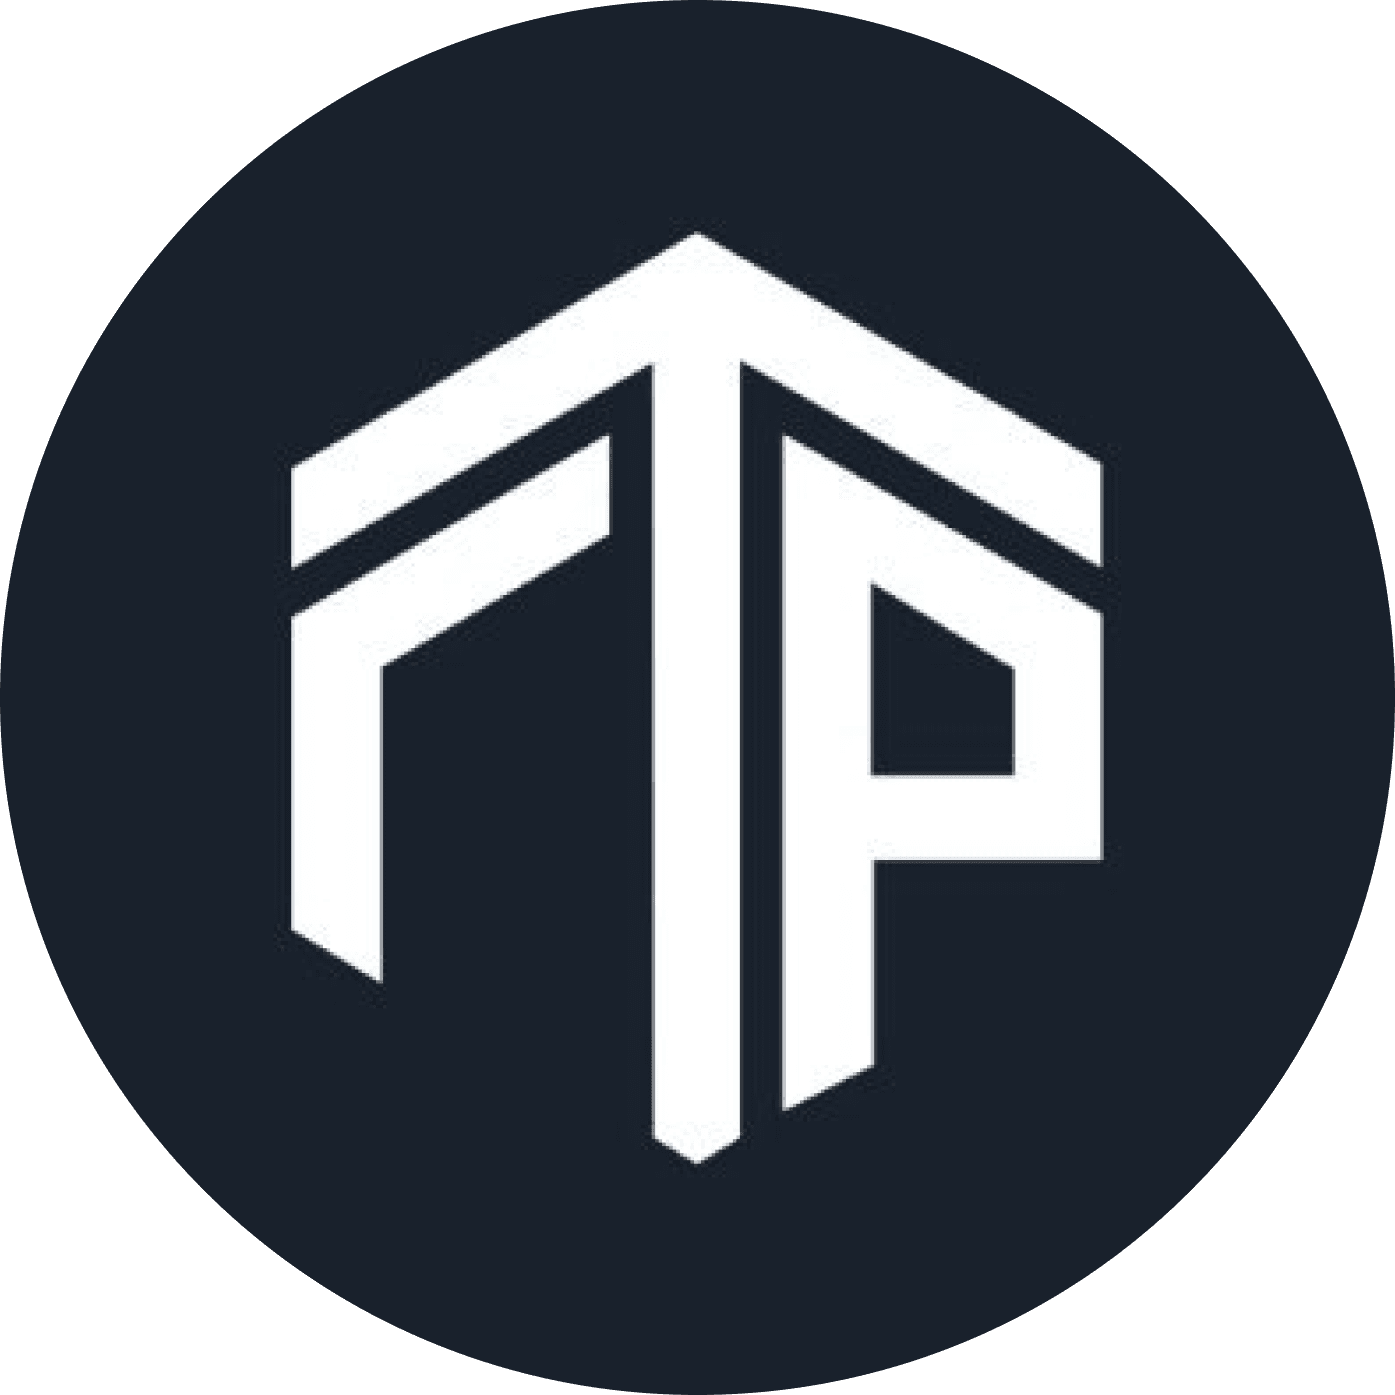 Funded Trading Plus